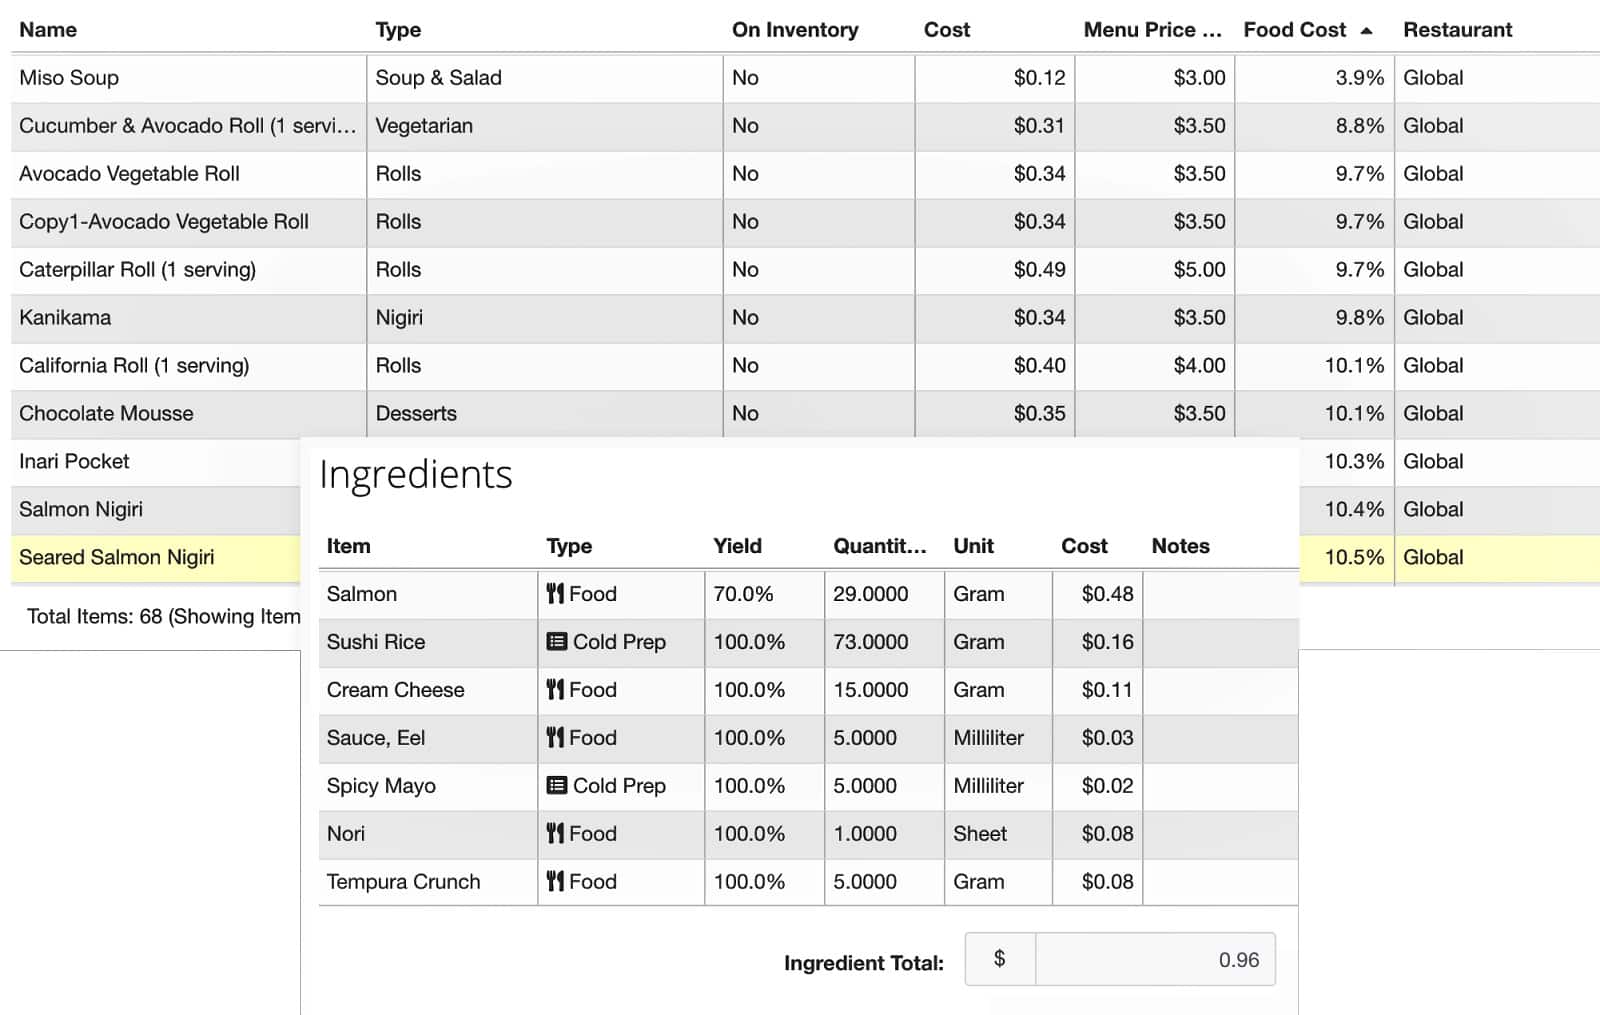 List of products with its type, inventory, cost, menu price for recipe costing report recipe costing report in MarginEdge.